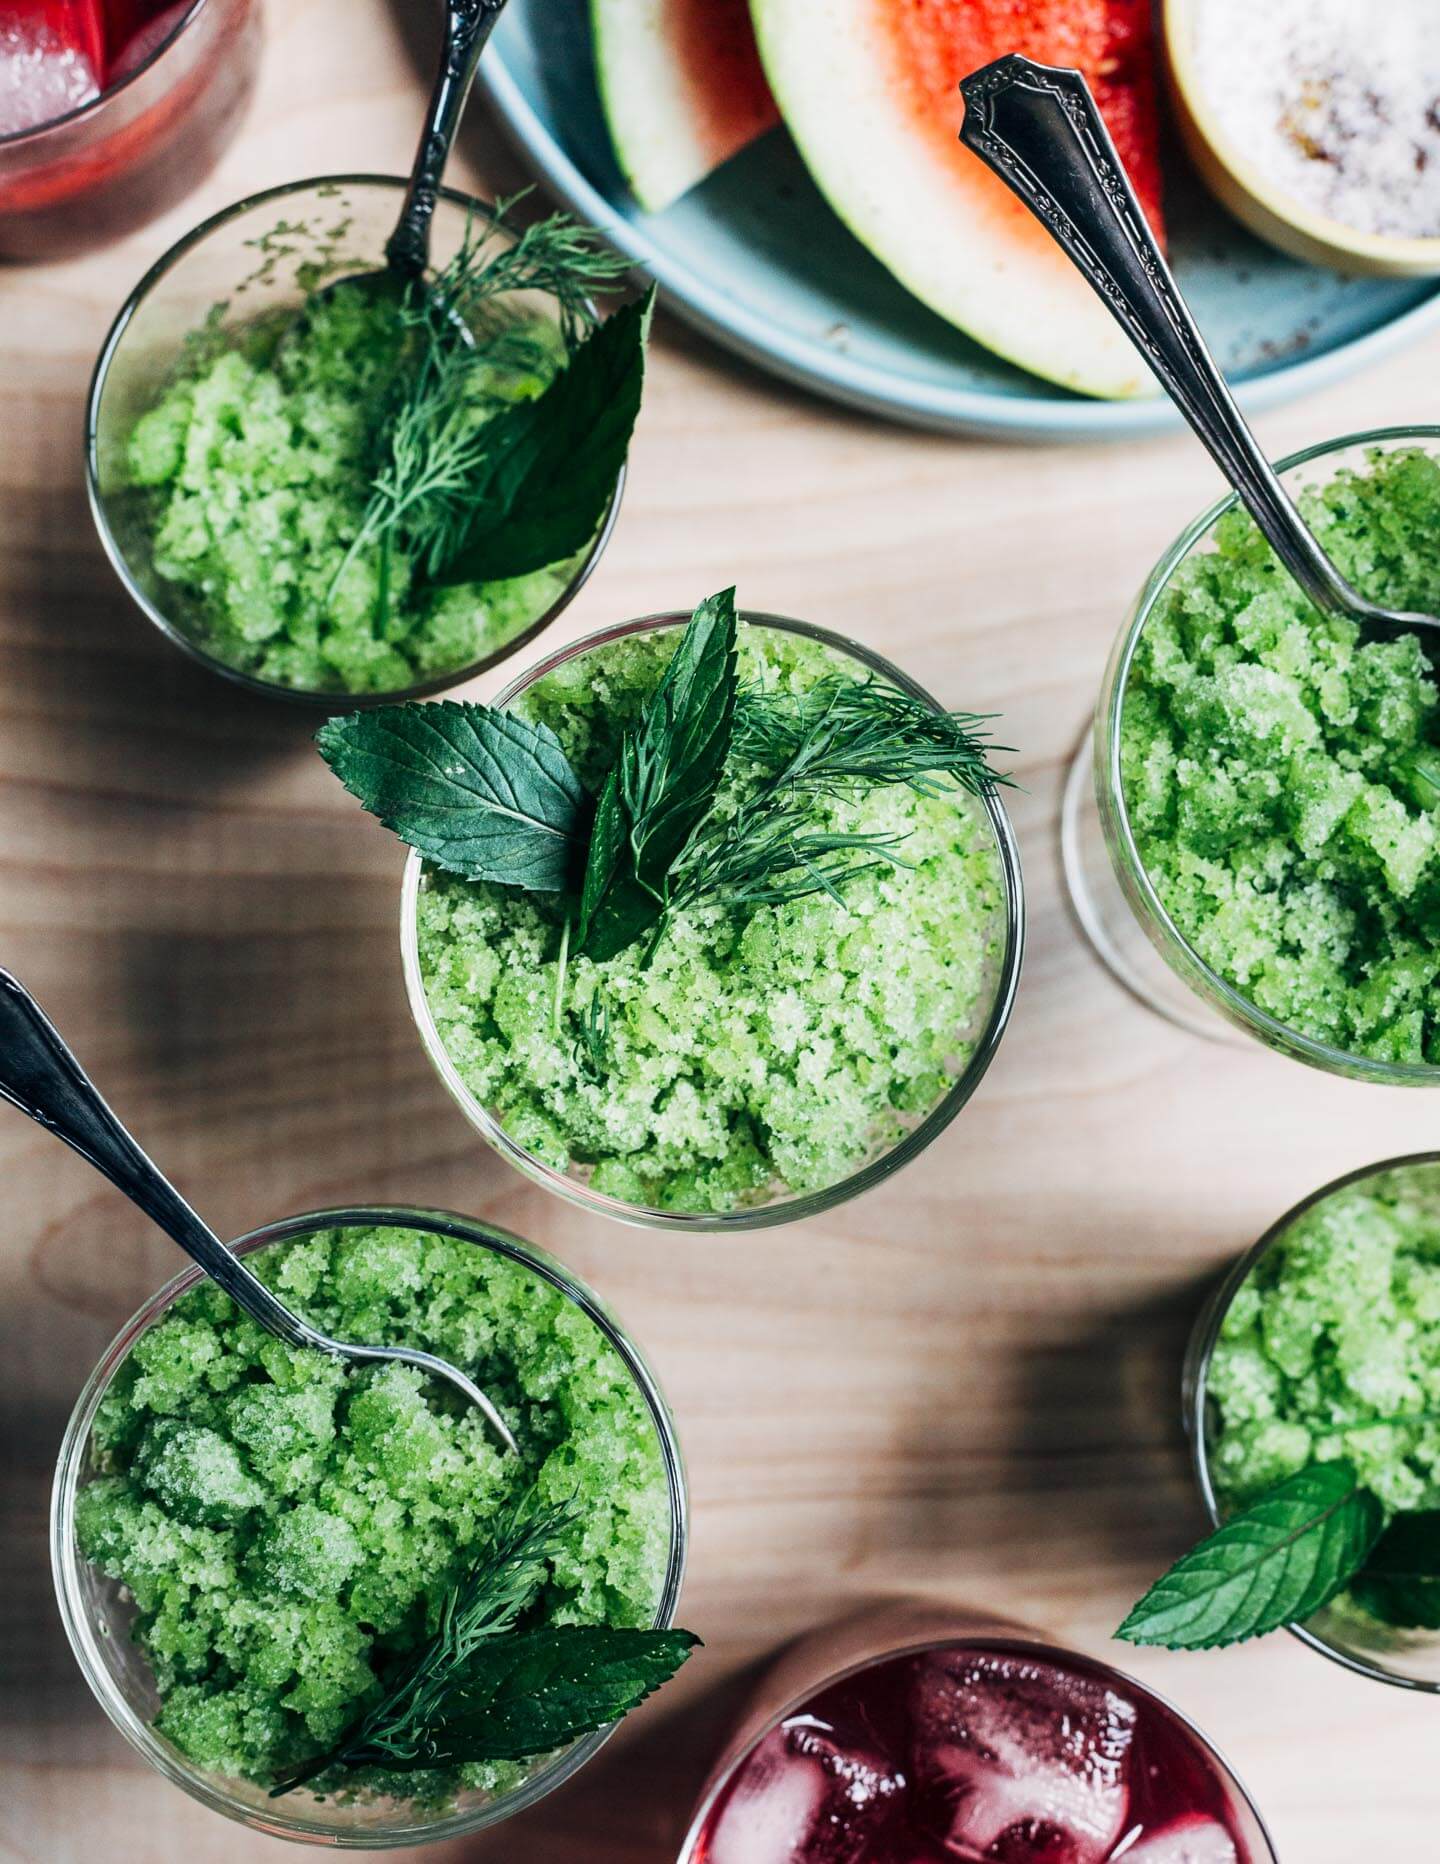 Small glasses filled with cucumber granita and garnished with herbs.